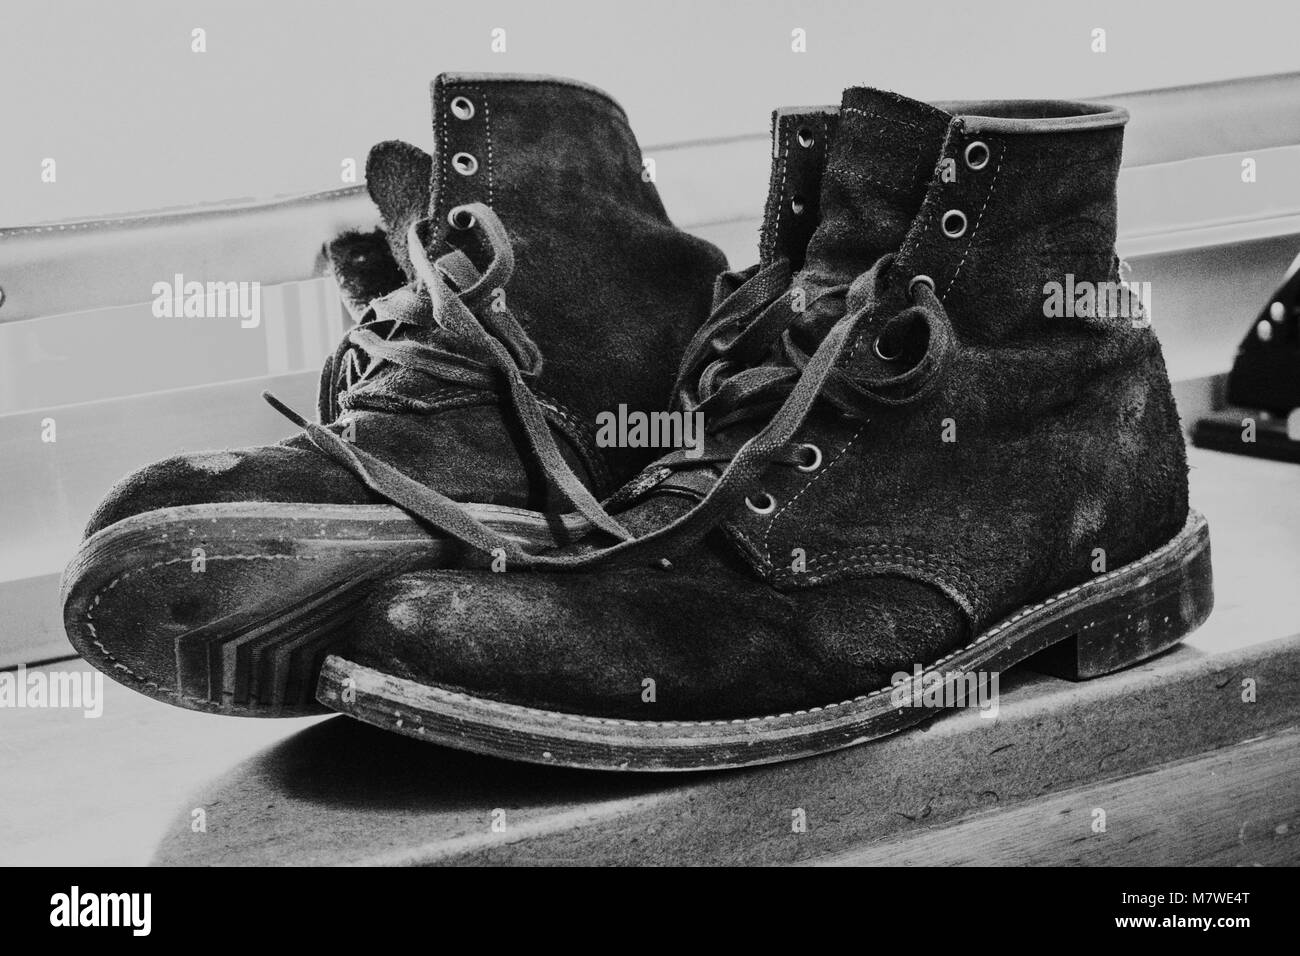 Pair of boots untied Stock Photo - Alamy